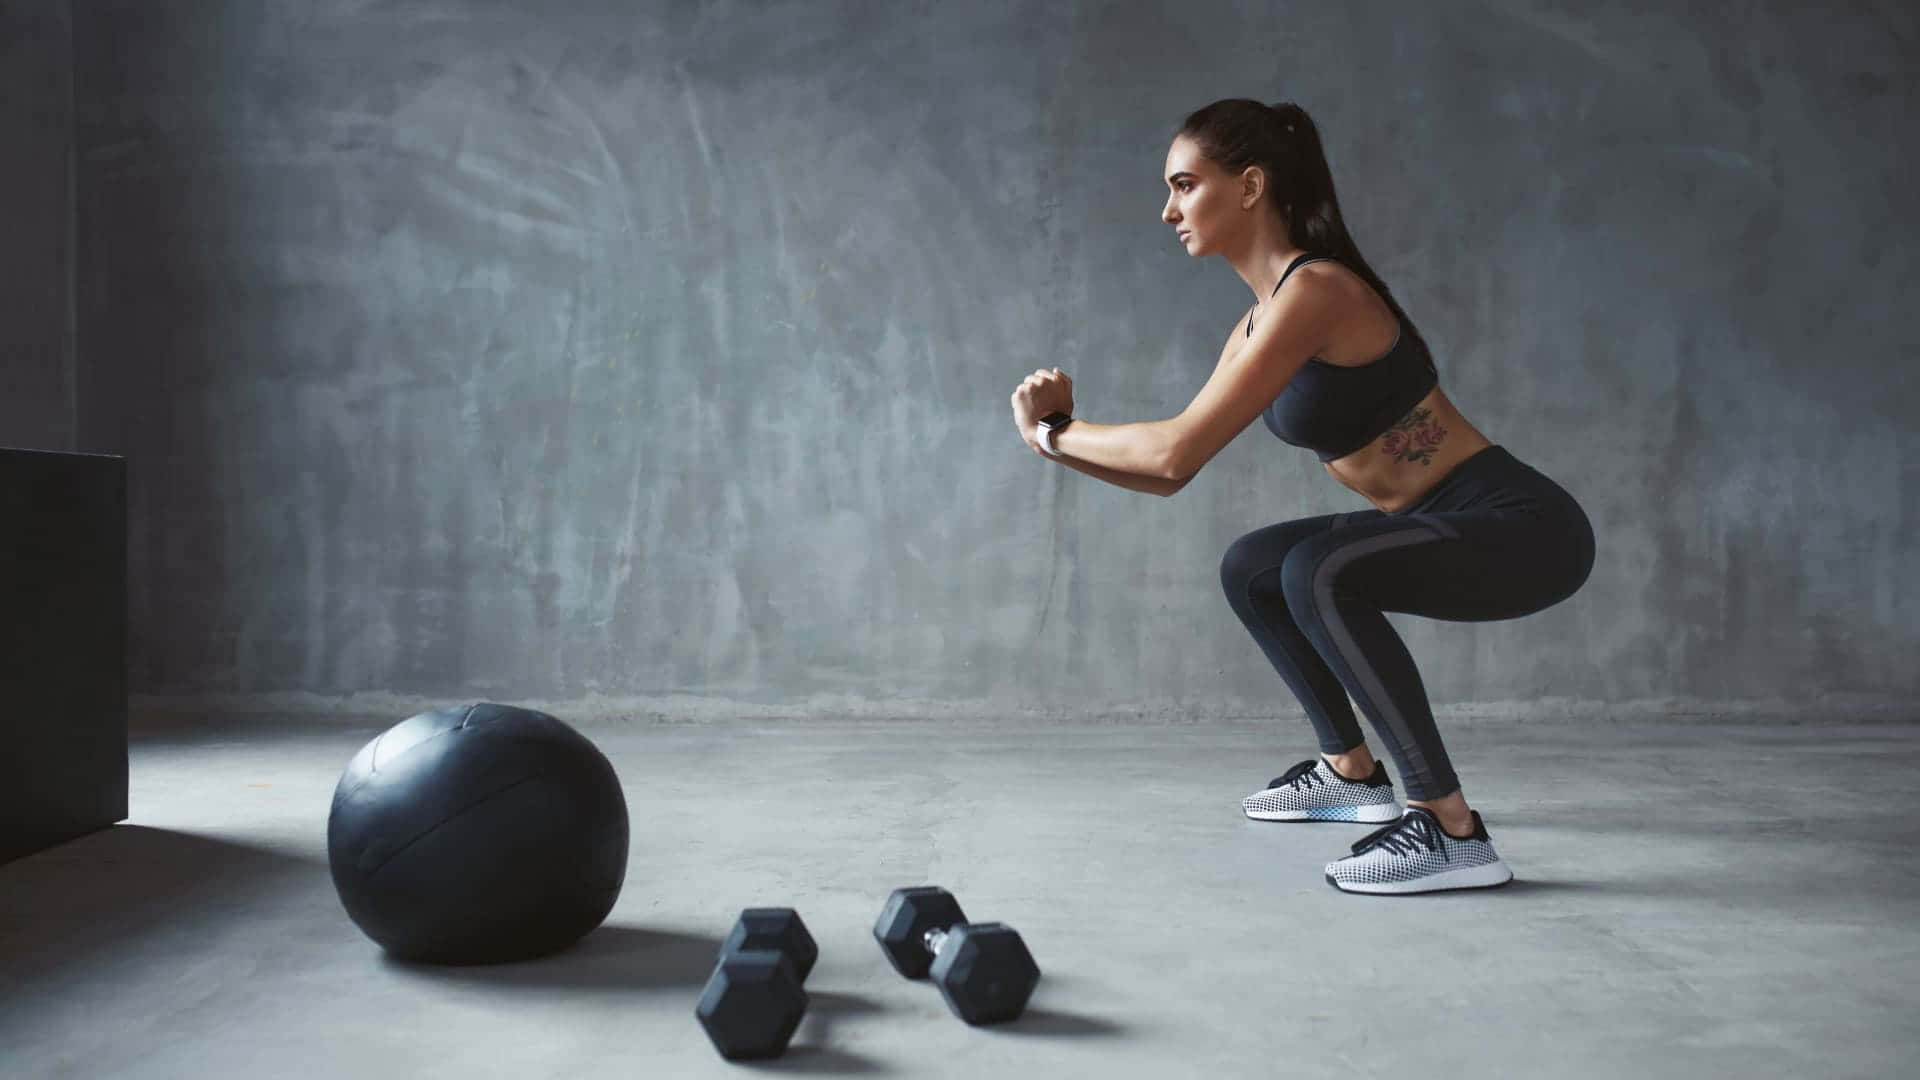 A Woman Is Doing Squats With A Ball And A Weight Wallpaper